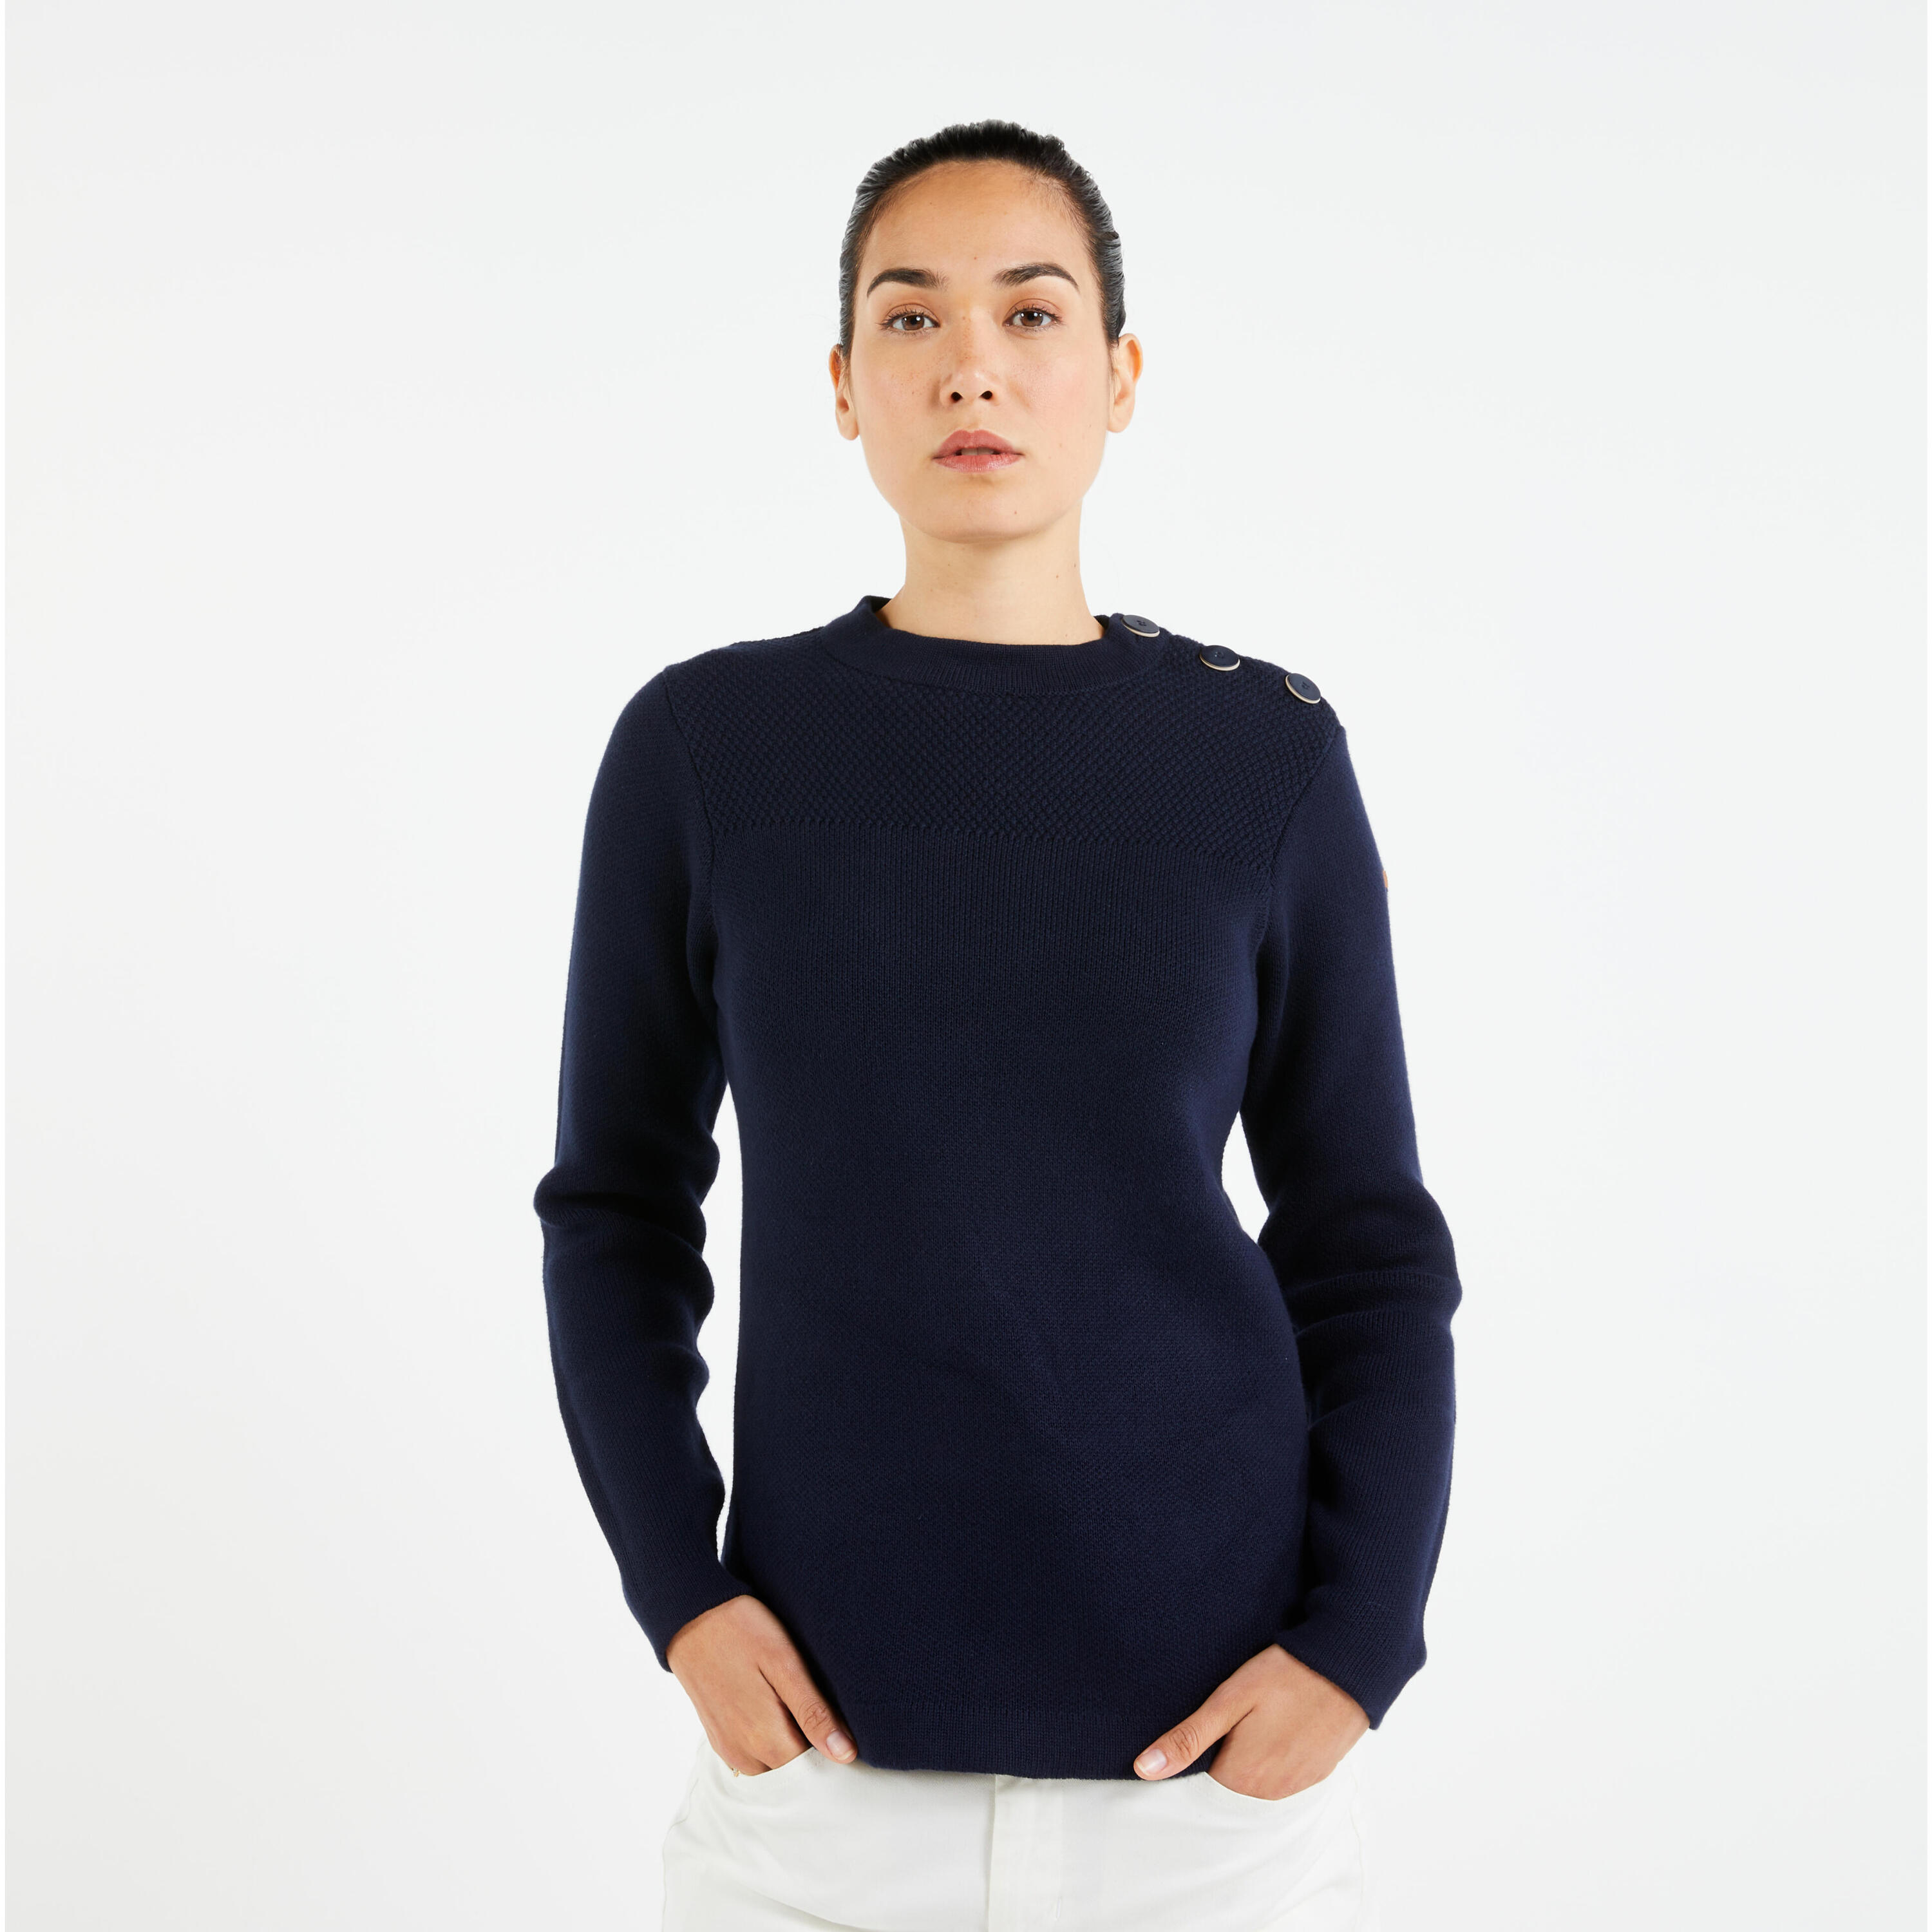 TRIBORD Women's Sailing Pullover - Navy Blue